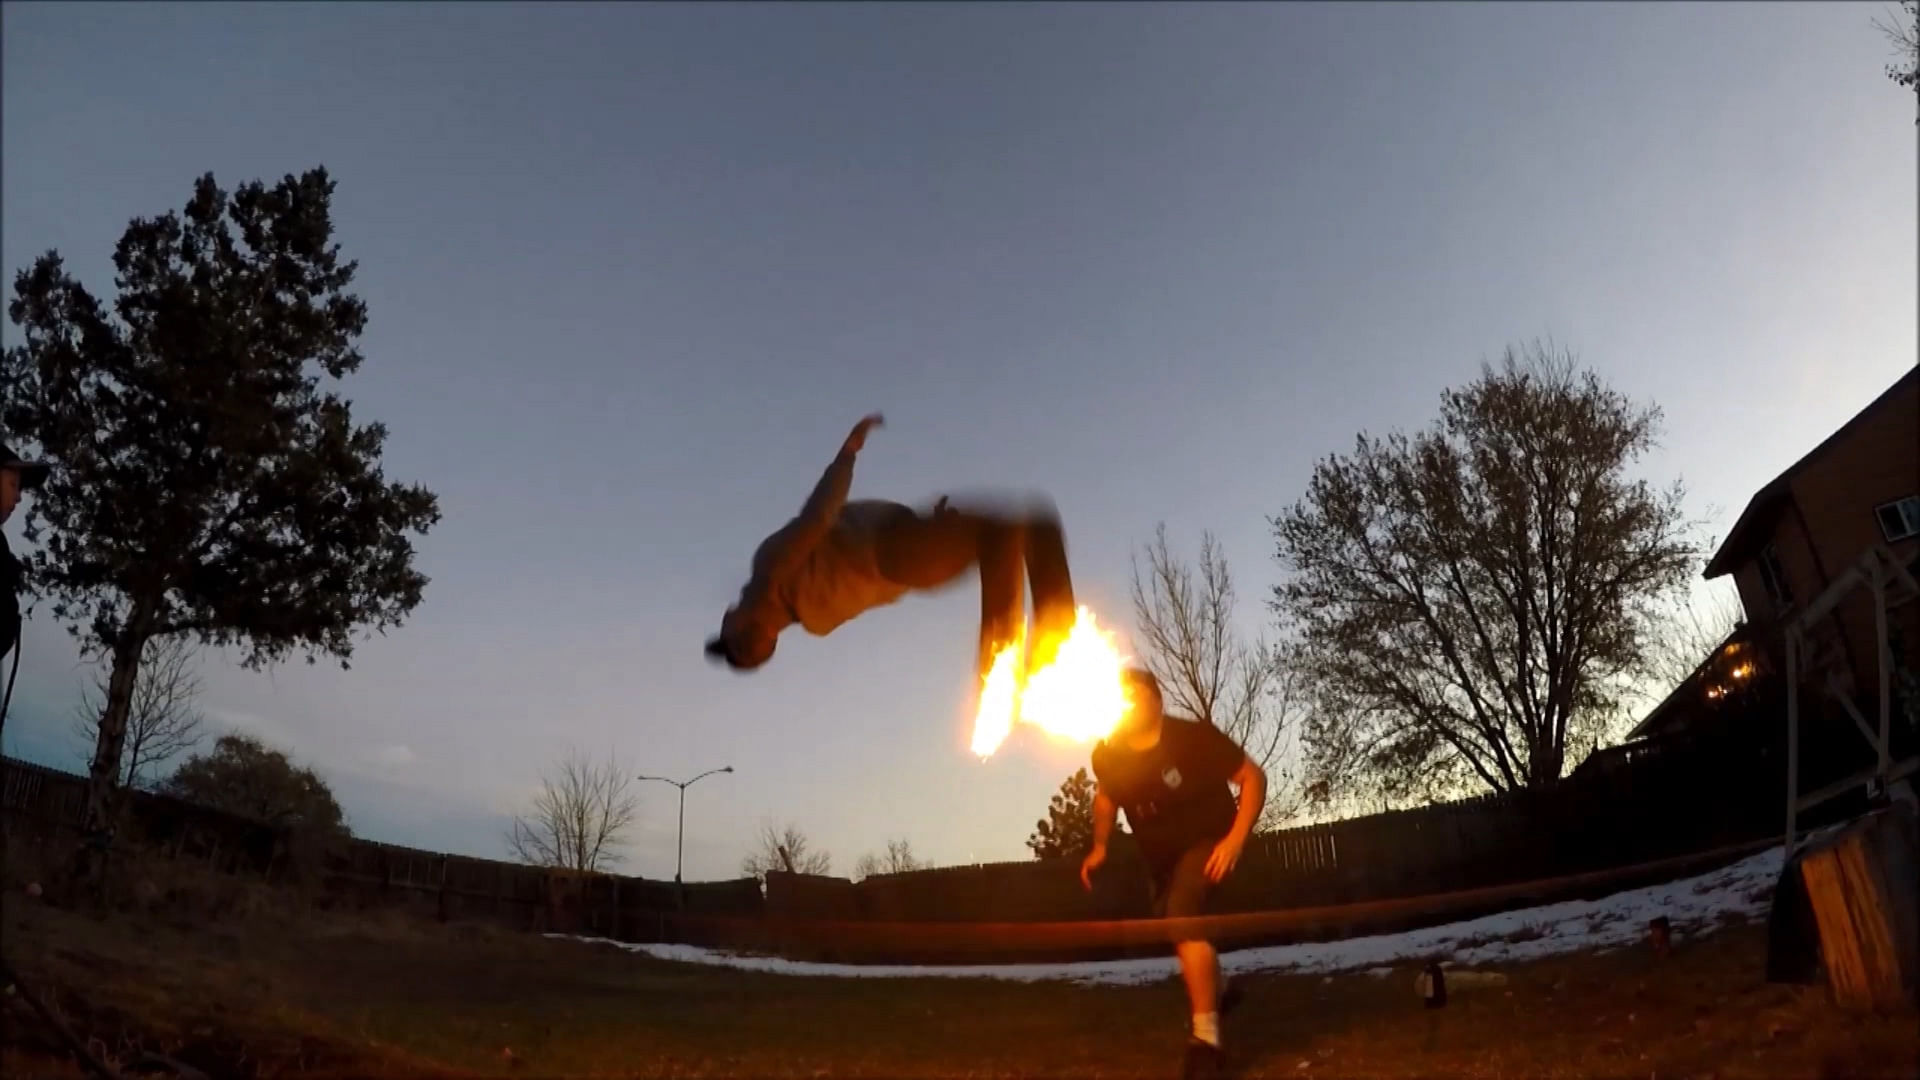 Daredevil Josh Beaudoin performing the deadly somersault with his trainers on fire. (Photo: AP/Caters News screengrab)